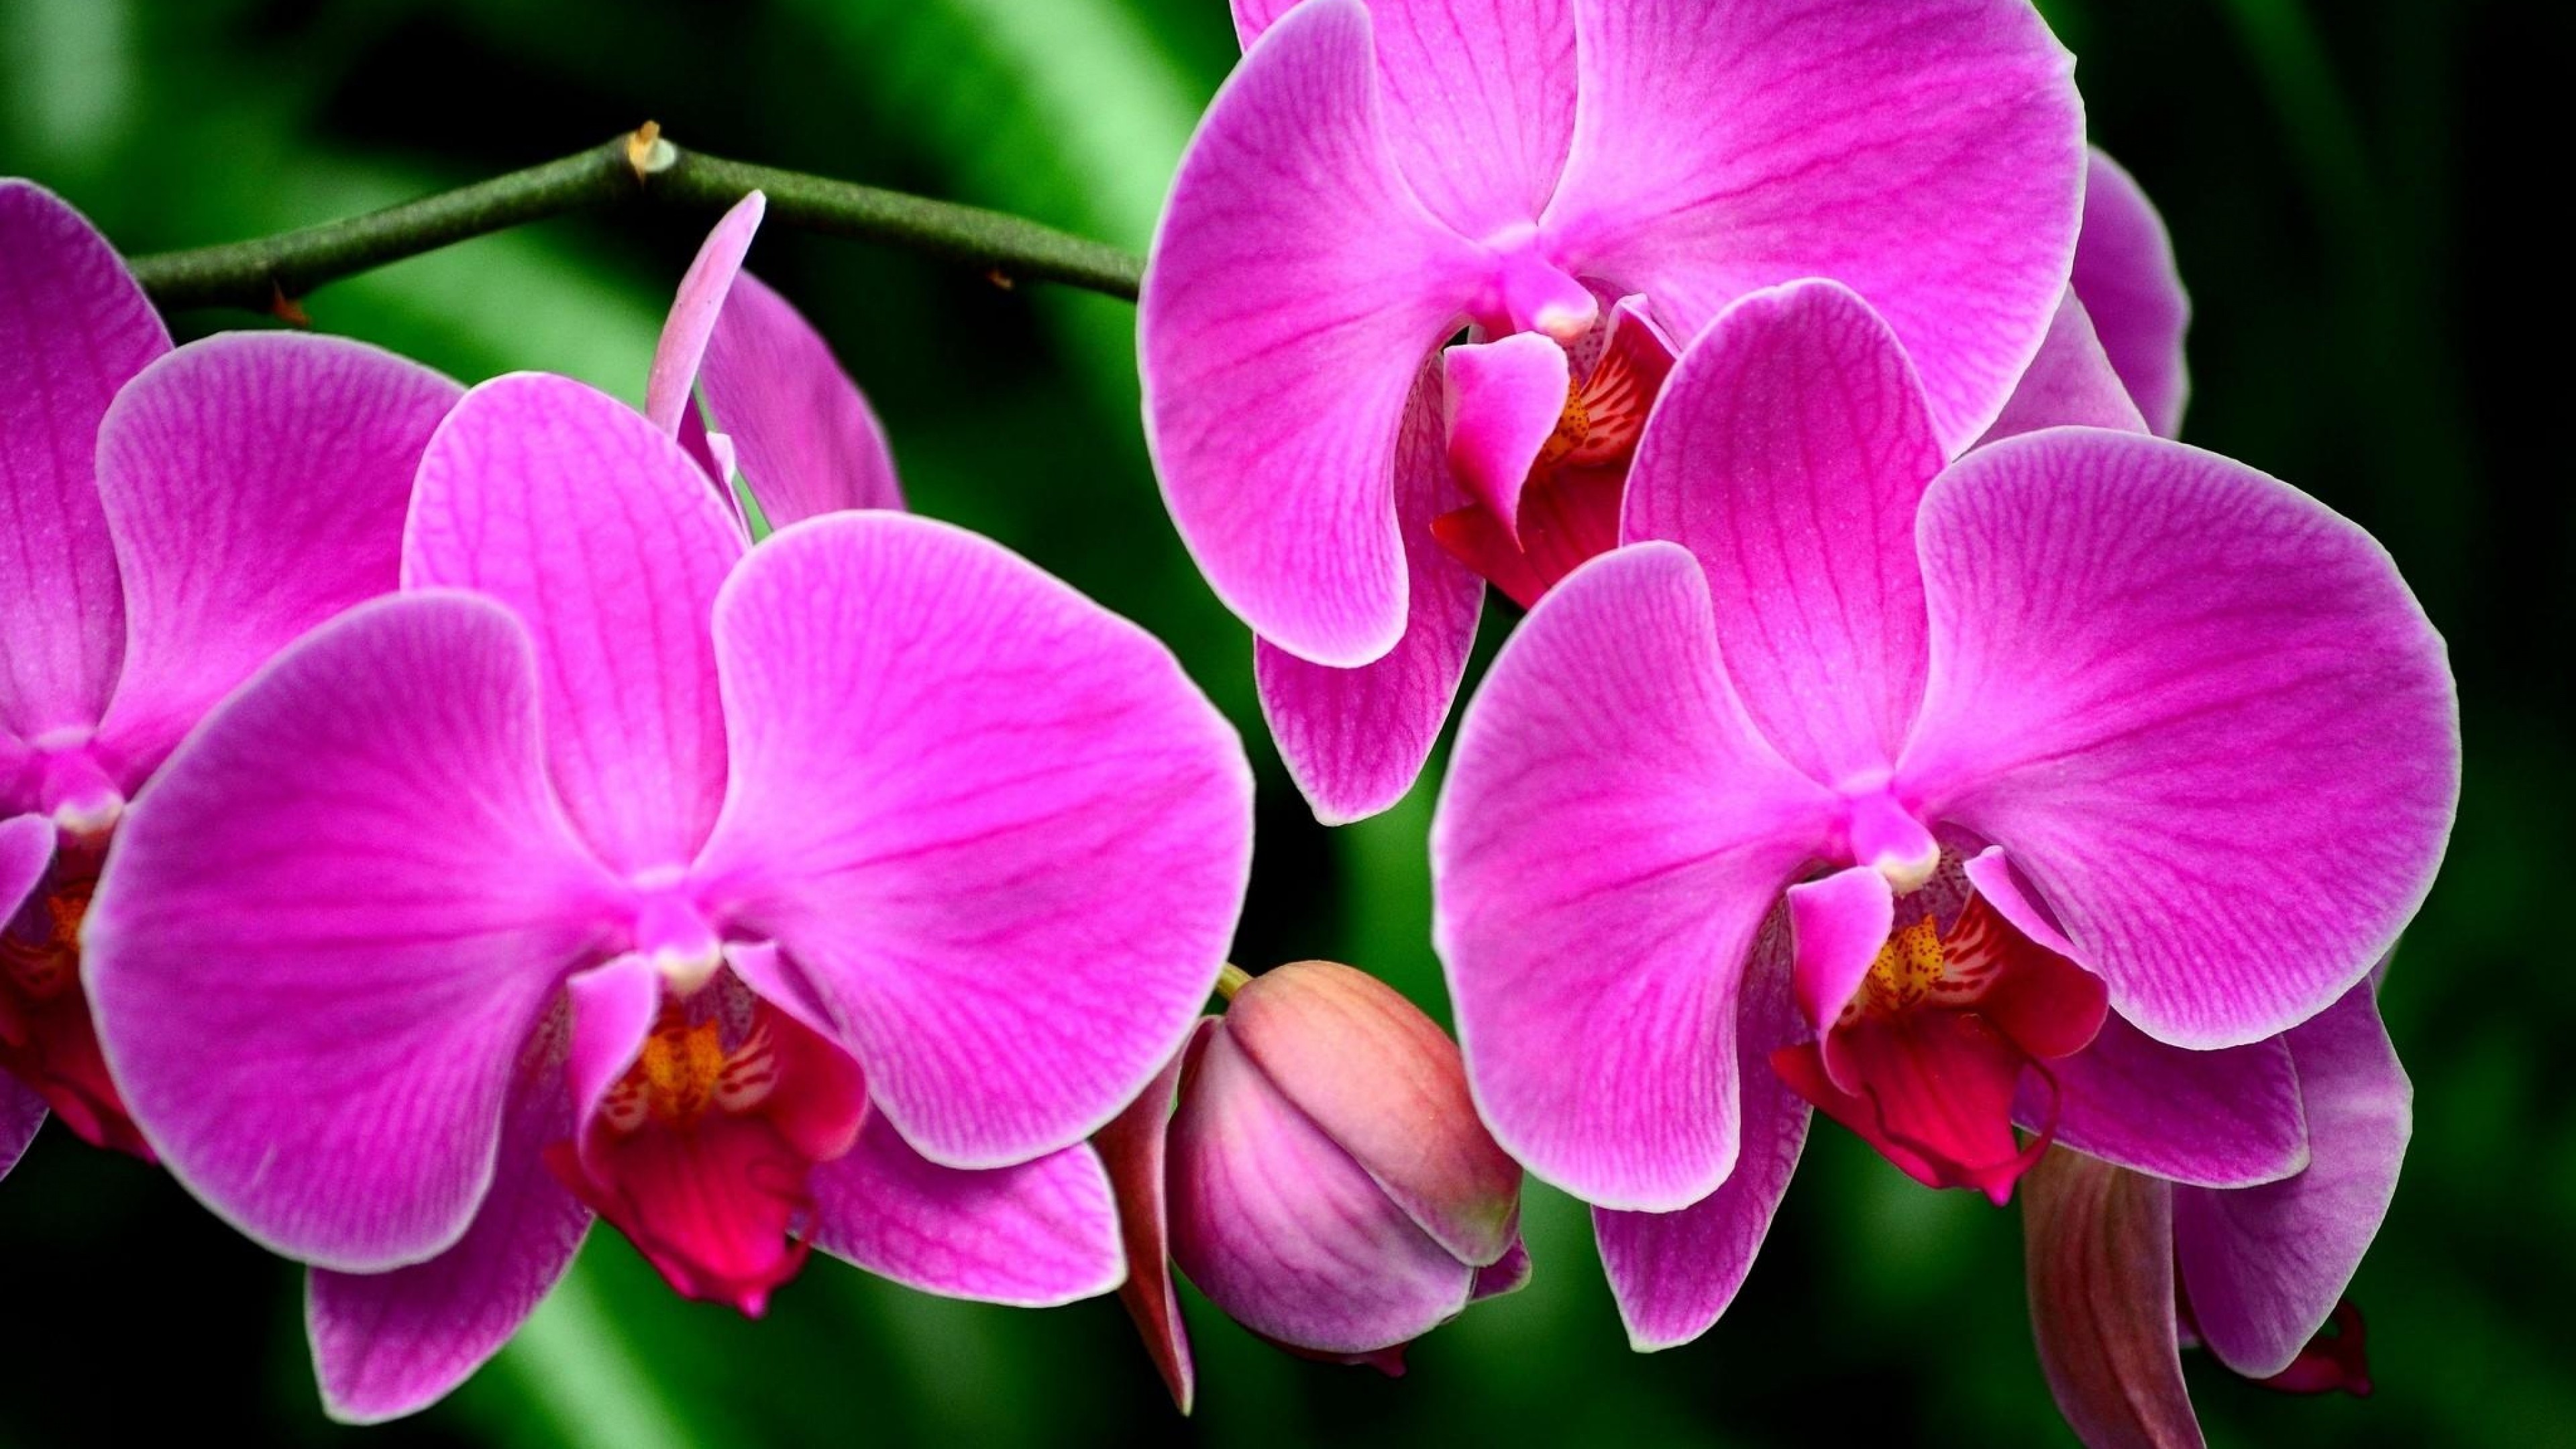 Orchid 4k Ultra HD Wallpaper | Background Image ...